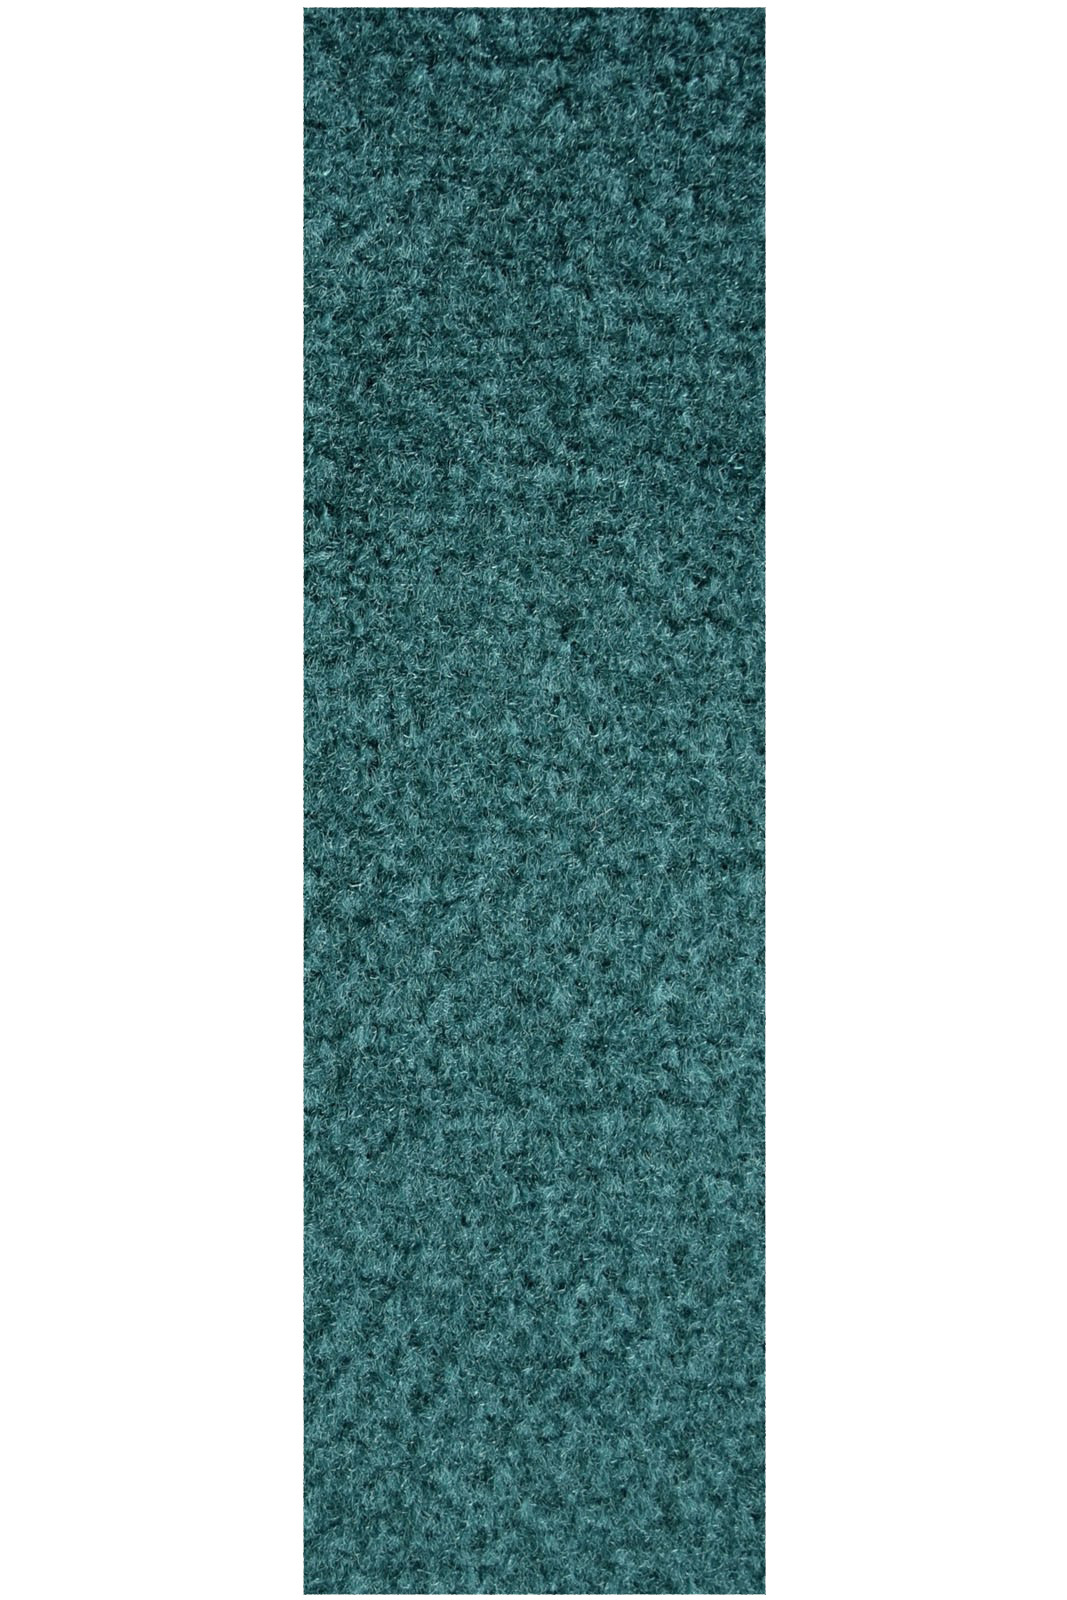 Commercial Indoor/Outdoor Teal Custom Size Runner 2' x 6' - Area Rug with Rubber Marine Backing for Patio, Porch, Deck, Boat, Basement or Garage with Premium Bound Polyester Edges - image 1 of 1